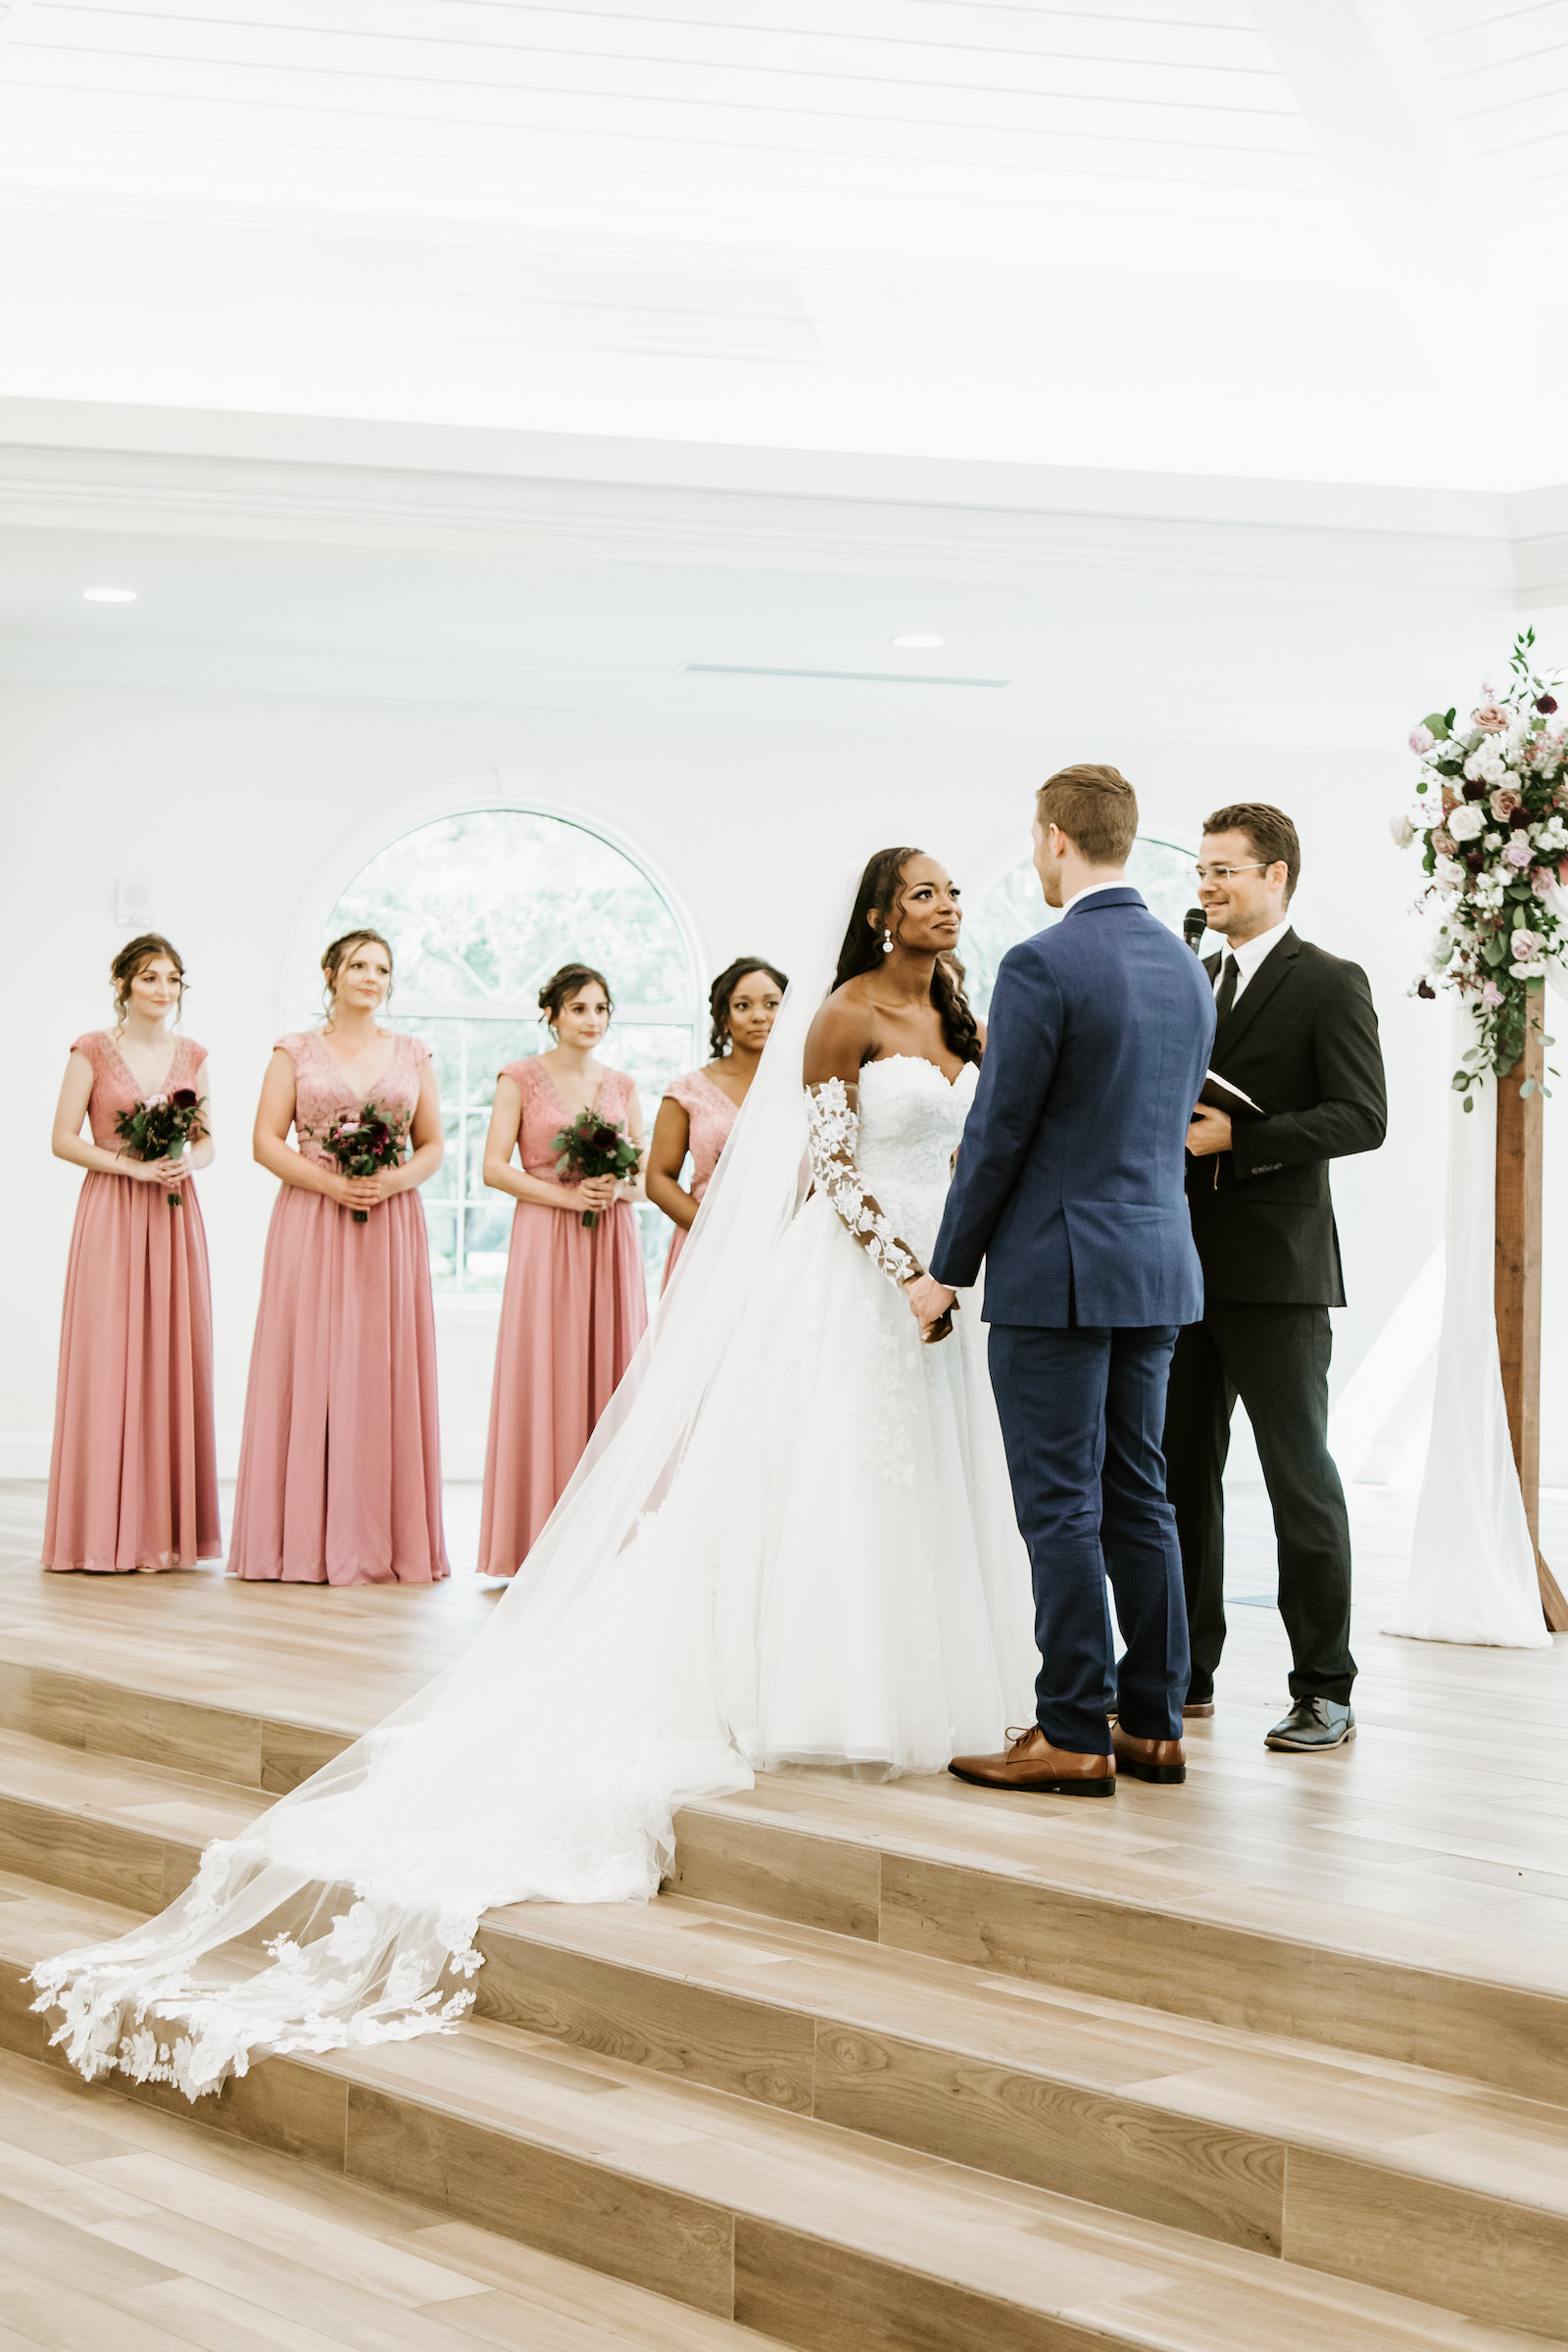 Indoor Church Wedding Ceremony at St. Pete Wedding Venue Harborside Chapel | Blush Pink Dusty Rose Mauve Bridesmaid Dresses | Tulle and Lace Ballgown Wedding Dress with Long Sleeves and Cathedral Length Veil | Groom in Navy Blue Suit